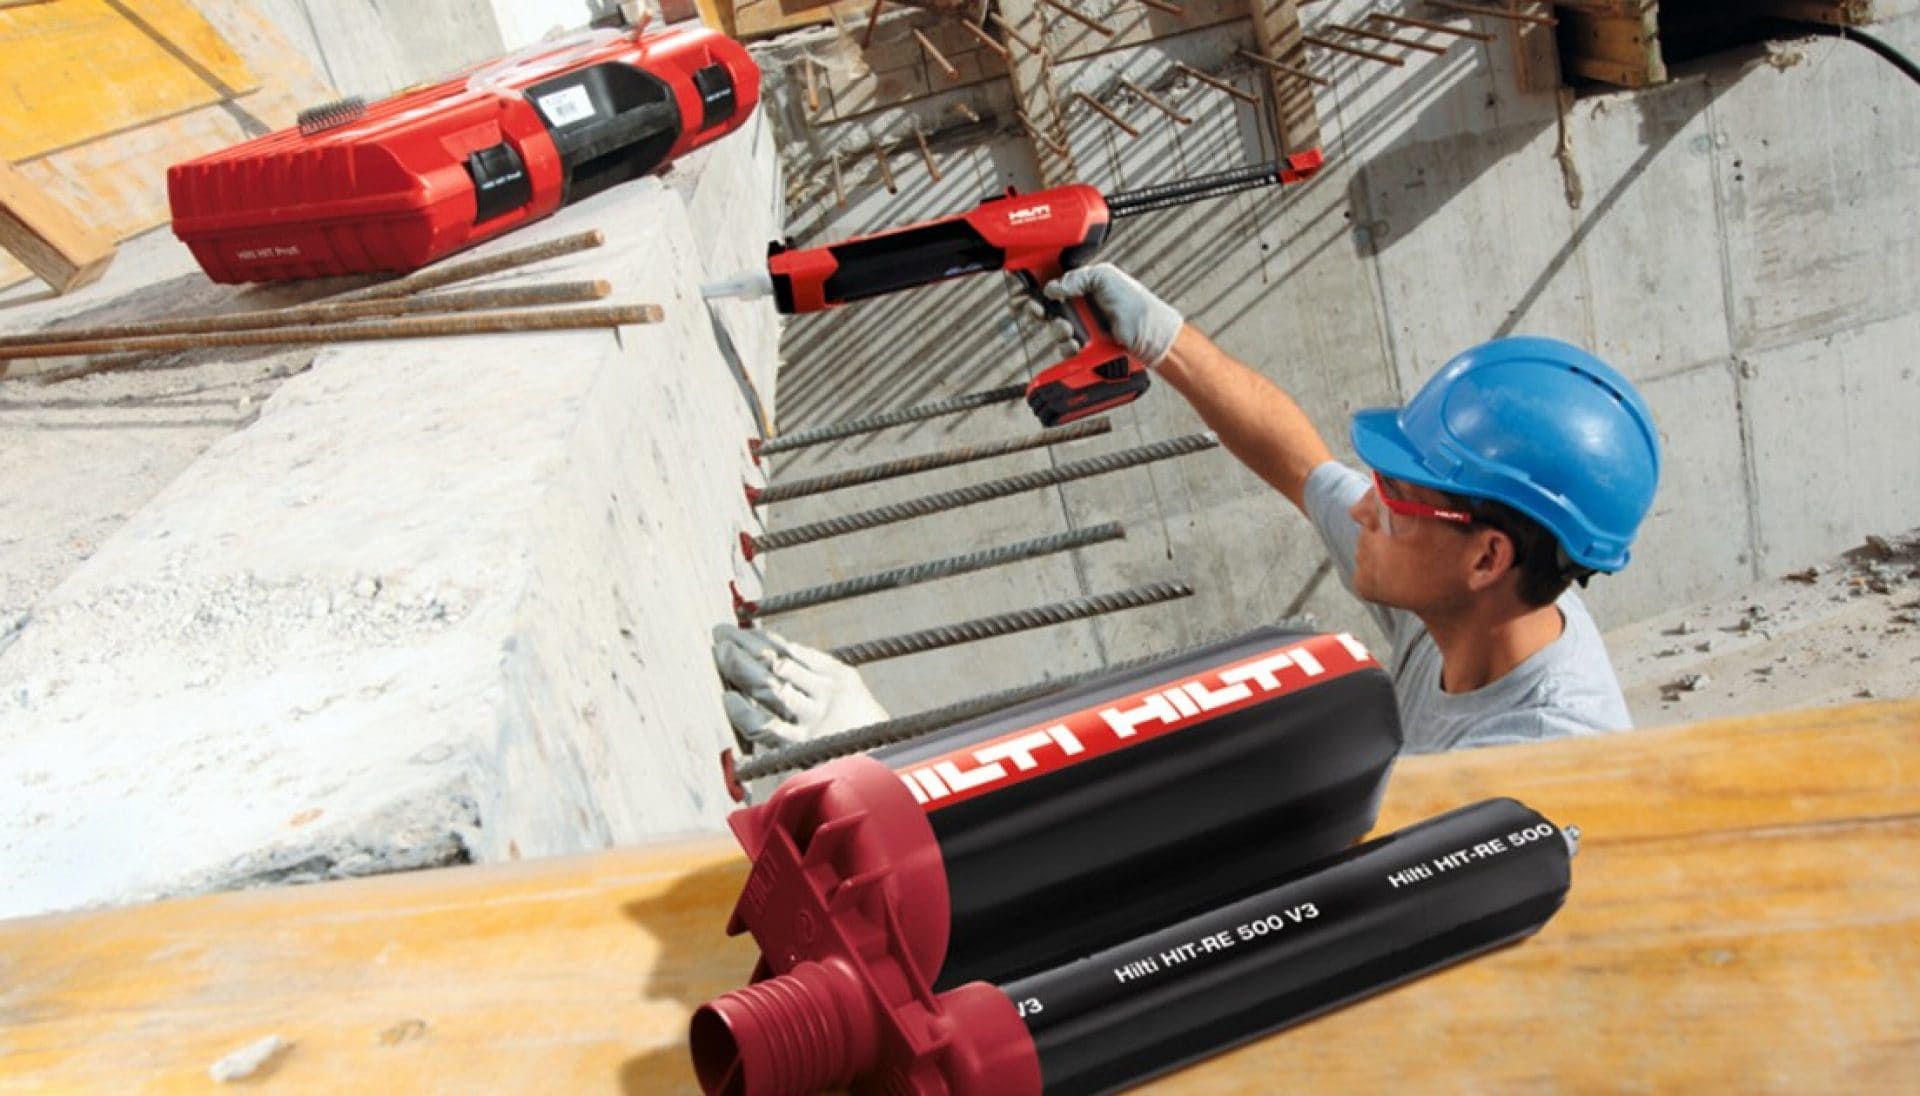 HIT-RE 500 V3- rebar installation with the HDE 500-A22 chemical anchor dispenser